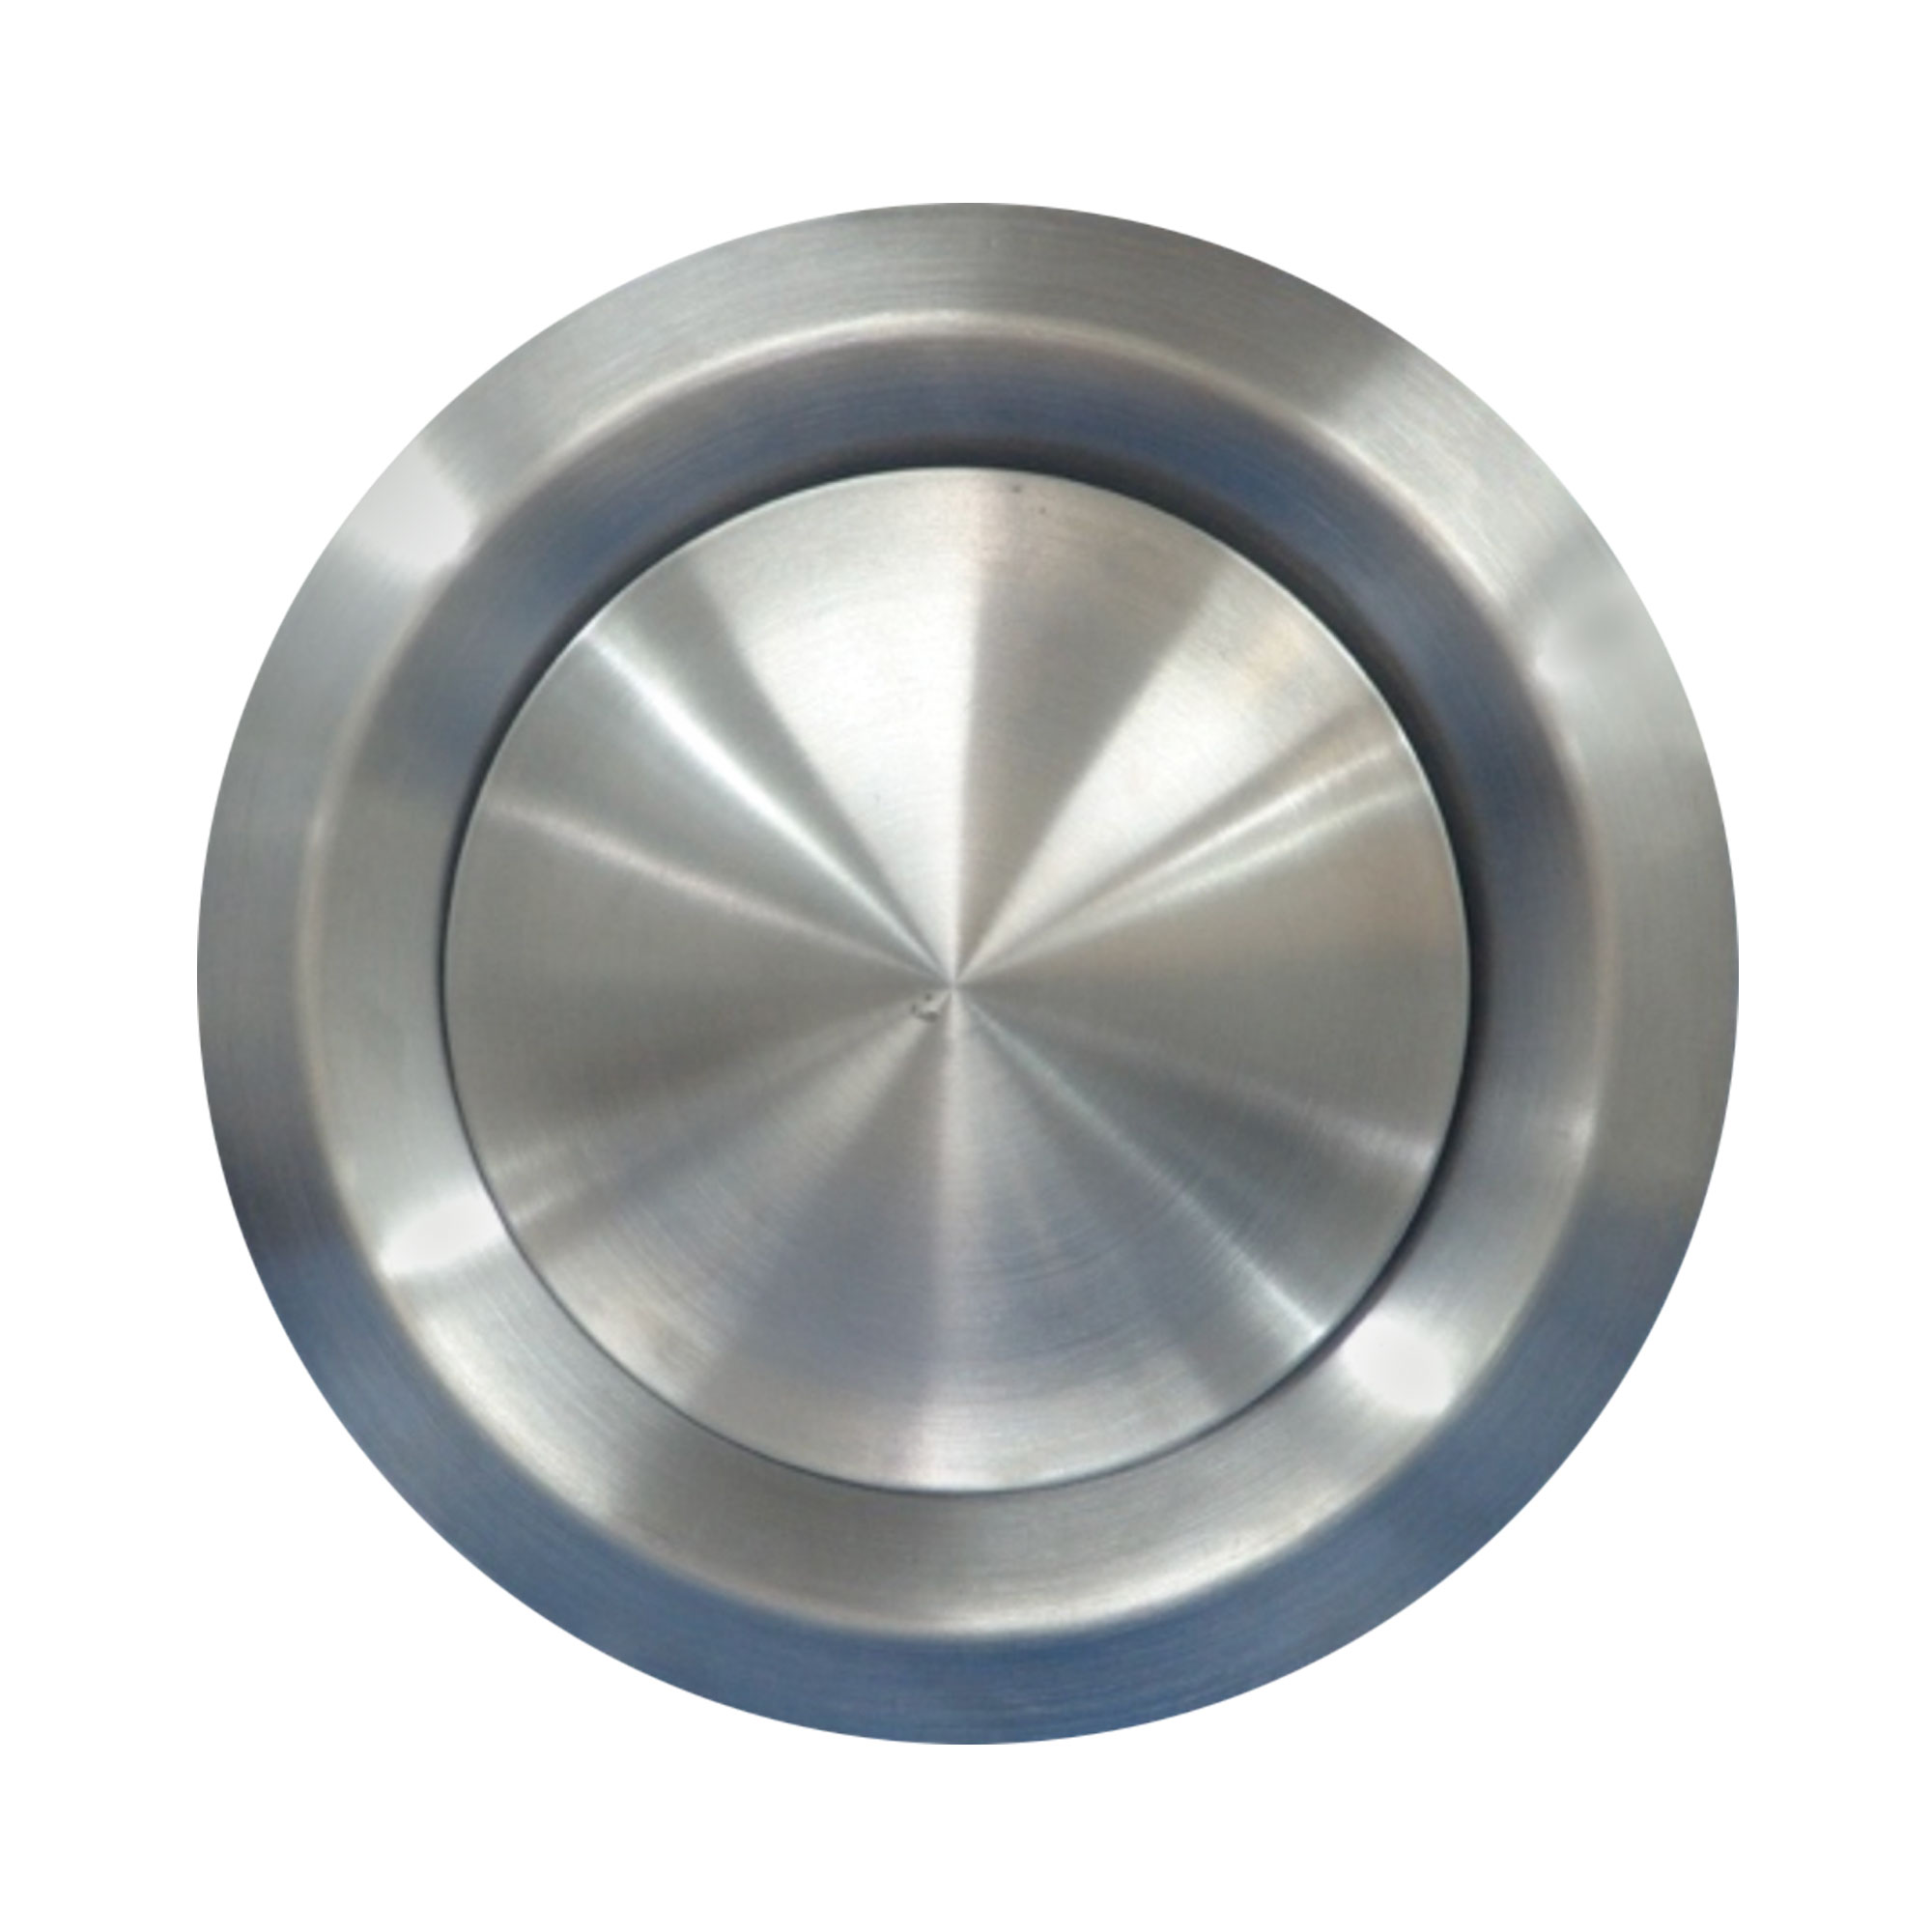 Masons Air Diffuser - Stainless Steel